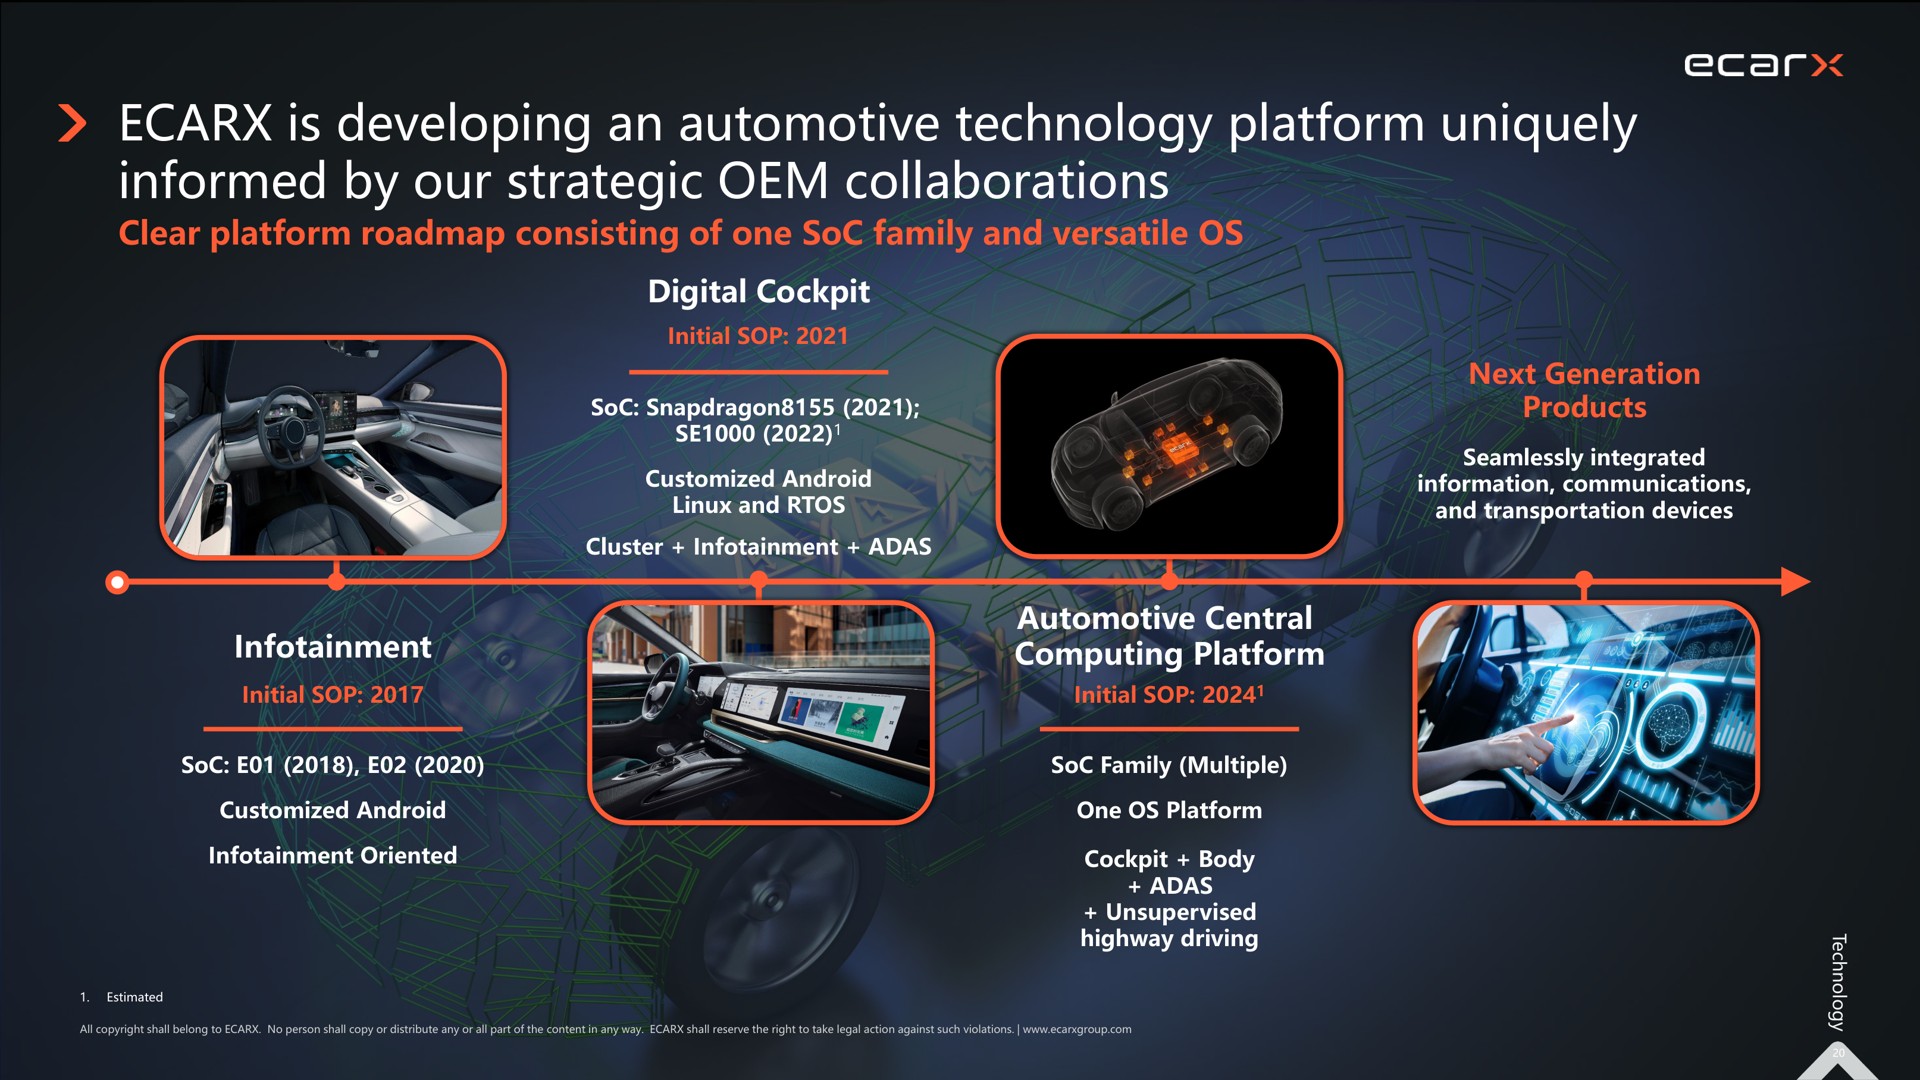 is developing an automotive technology platform uniquely informed by our strategic collaborations | Ecarx